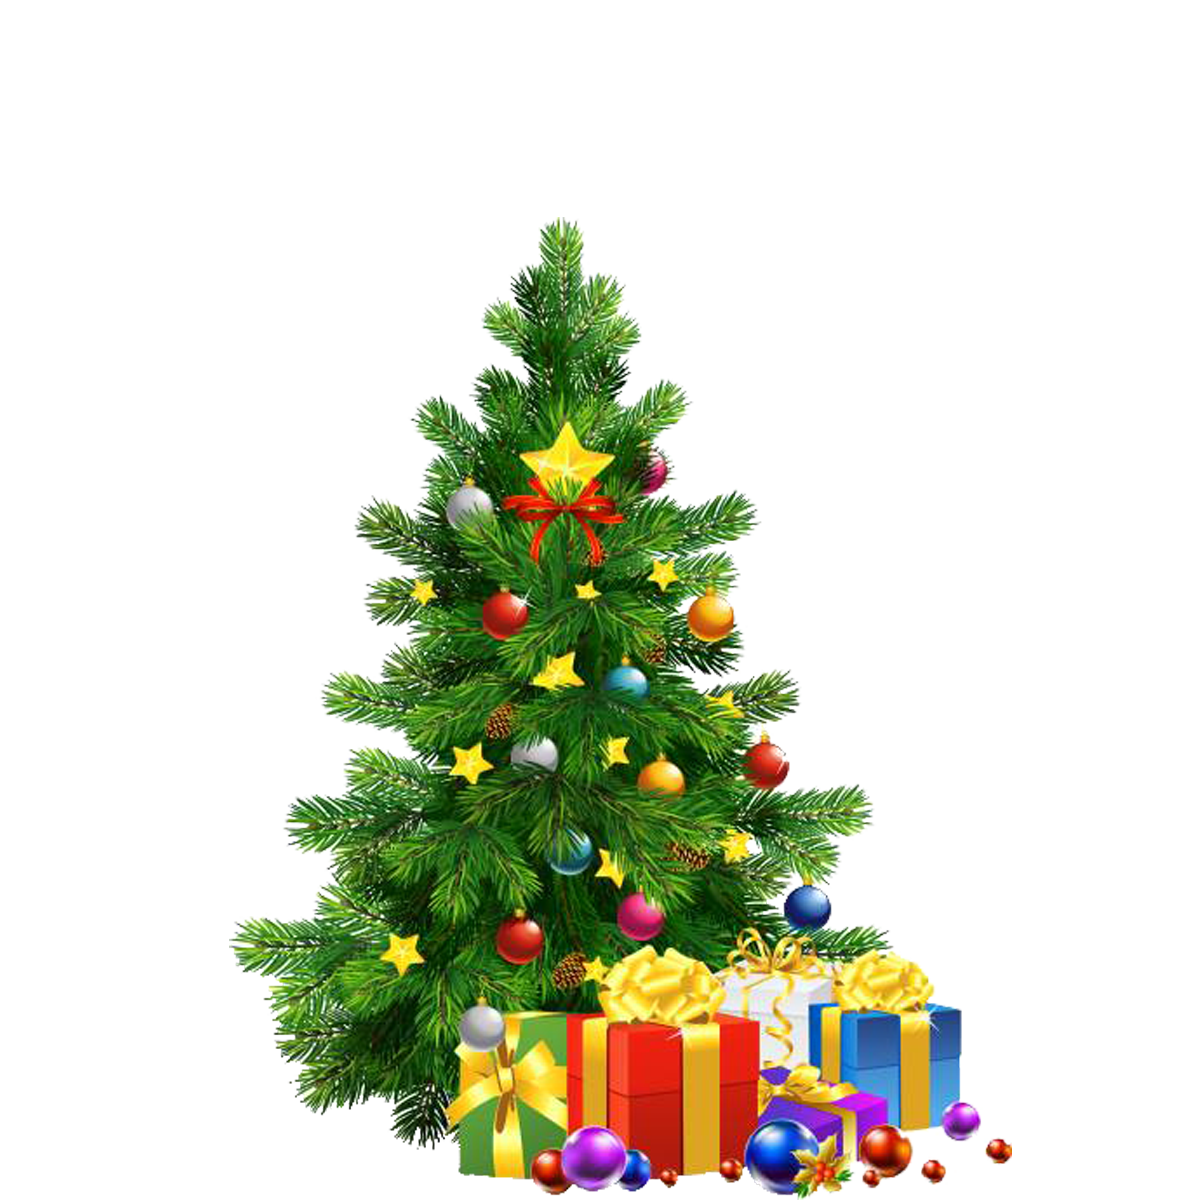 Cartoon Christmas tree with parcels under the tree